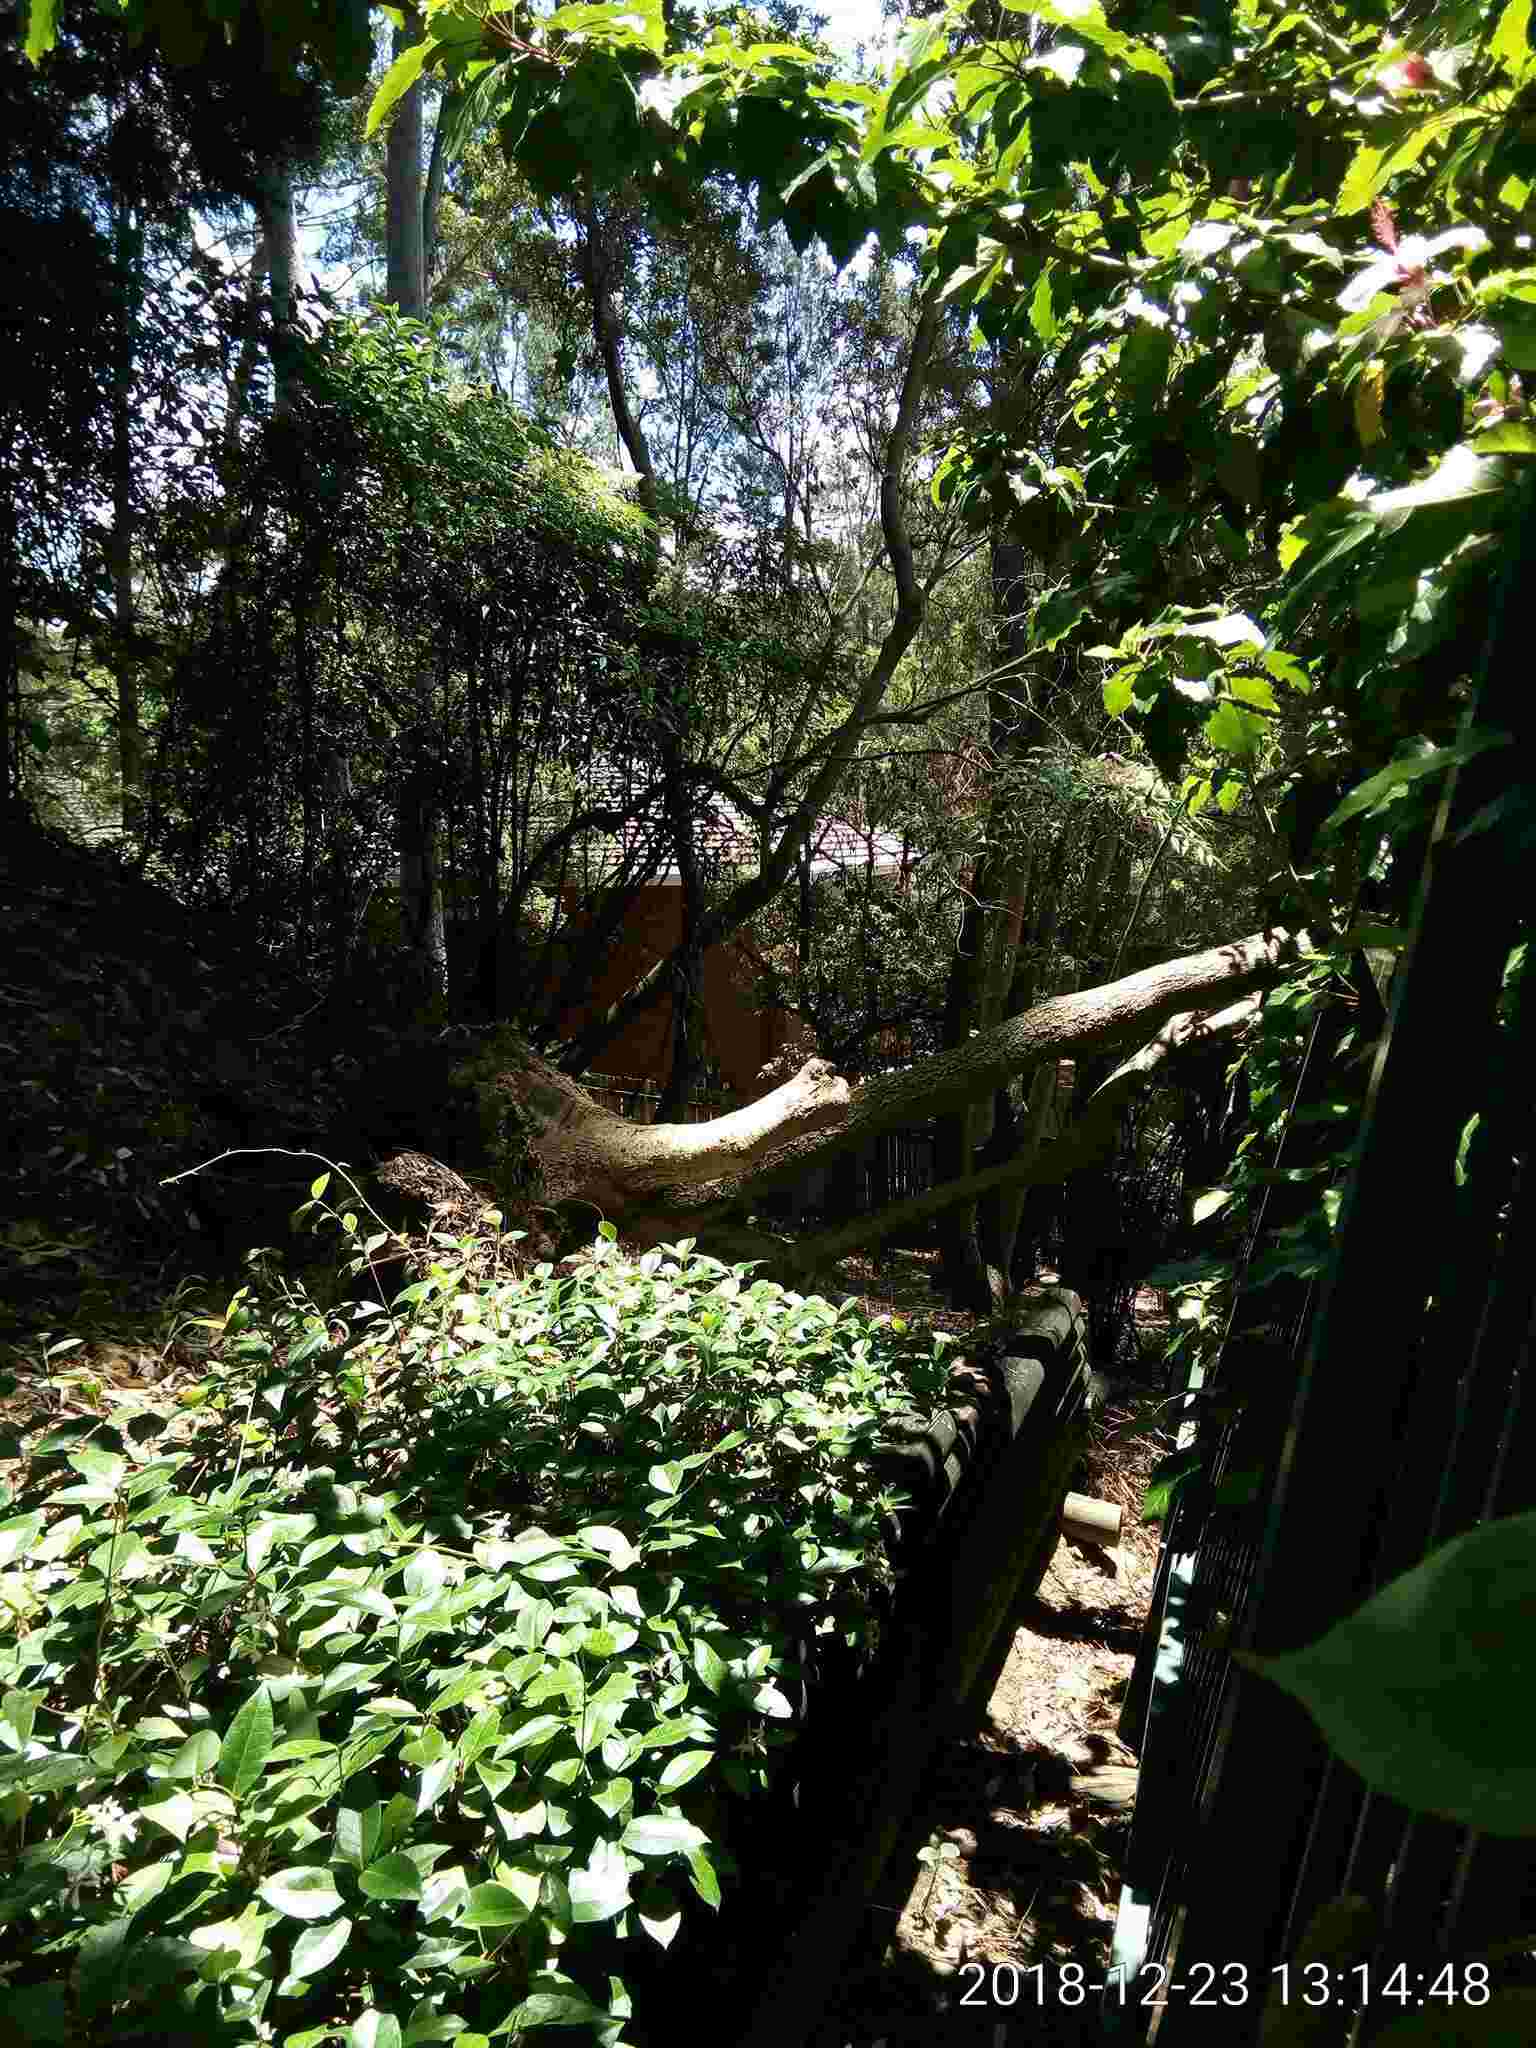 SP52948-neglected-damage-to-fence-due-to-uprooted-tree-that-might-cause-damage-to-property-outside-complex-photo-1-23Dec2018.jpg